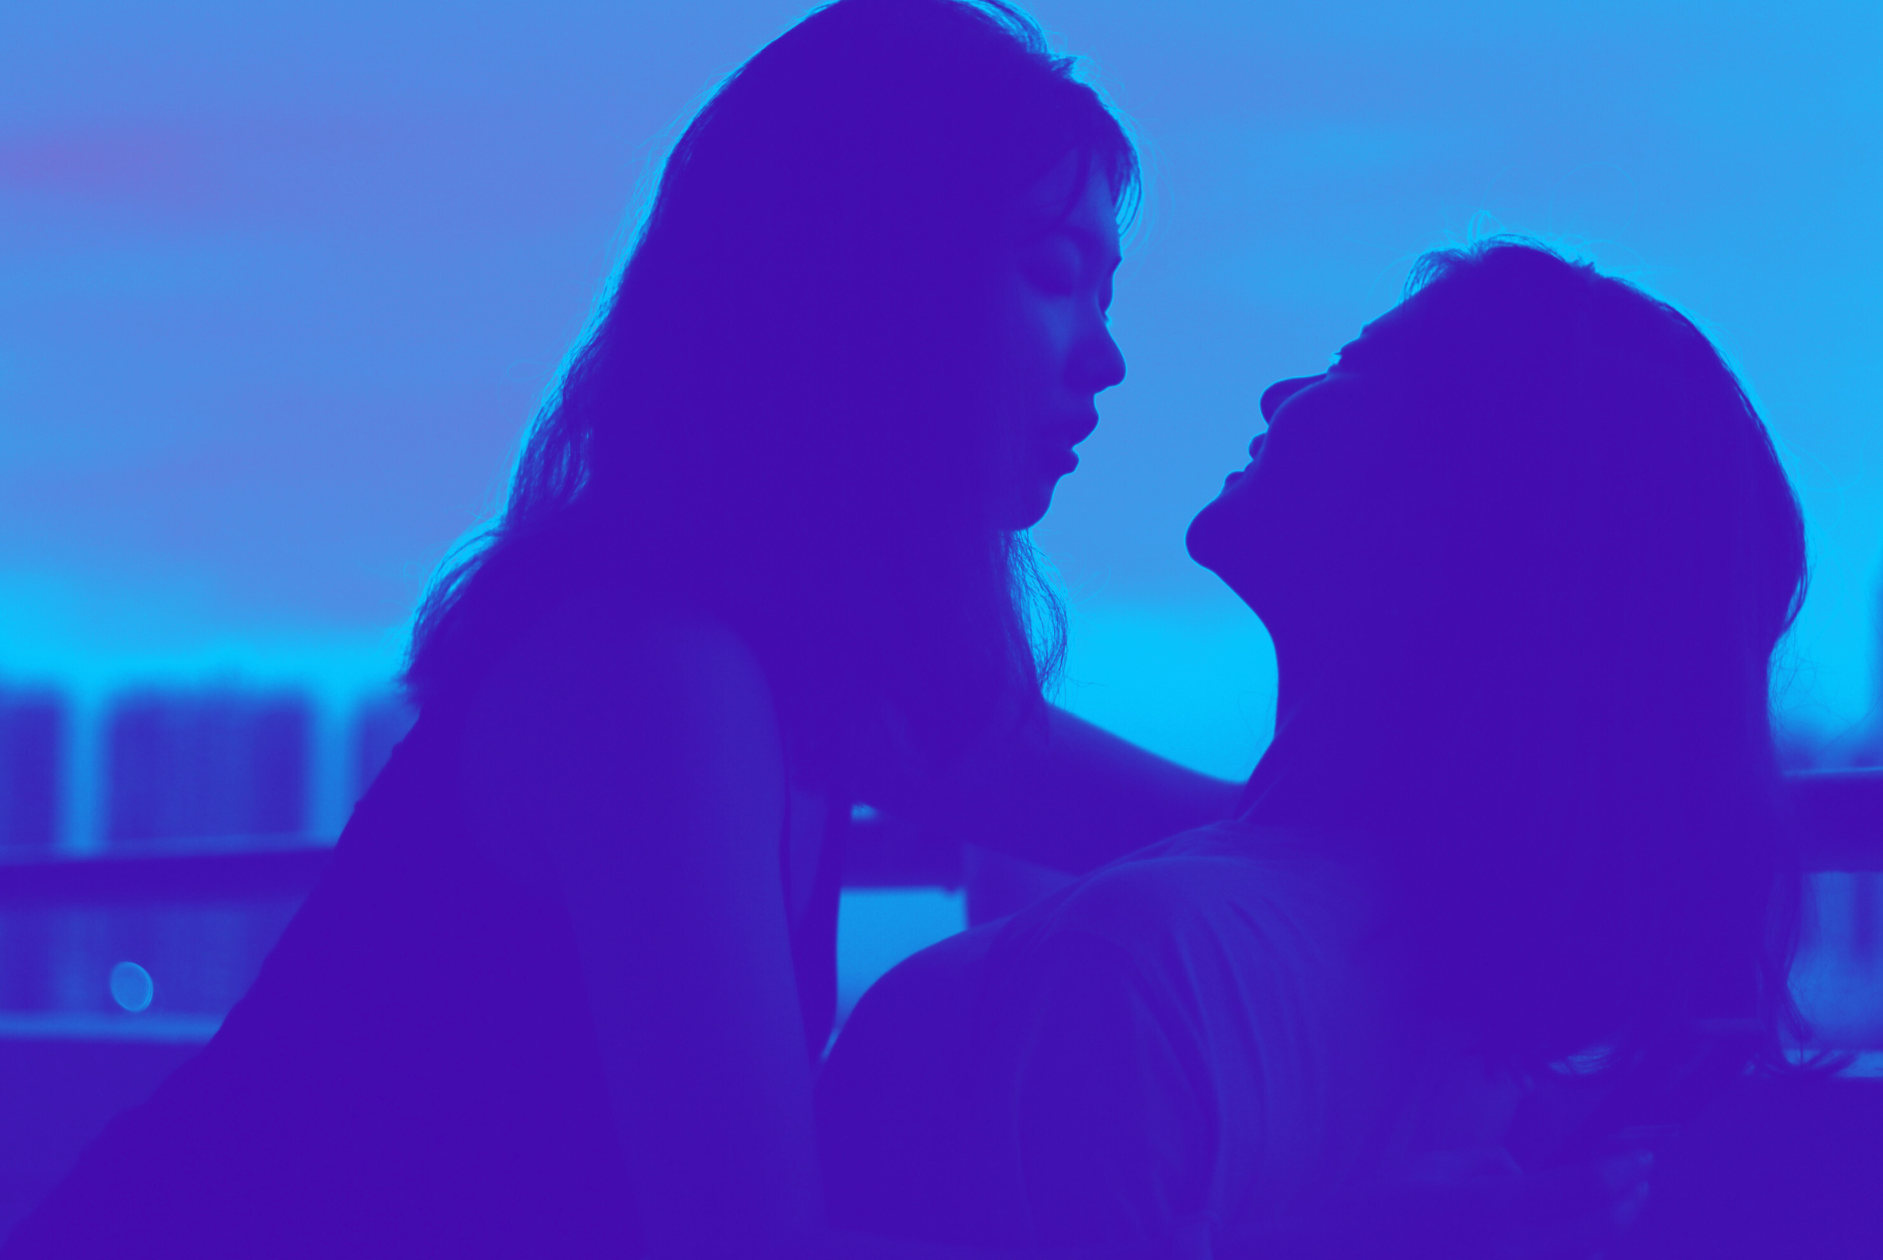 silhouette of women intimately together